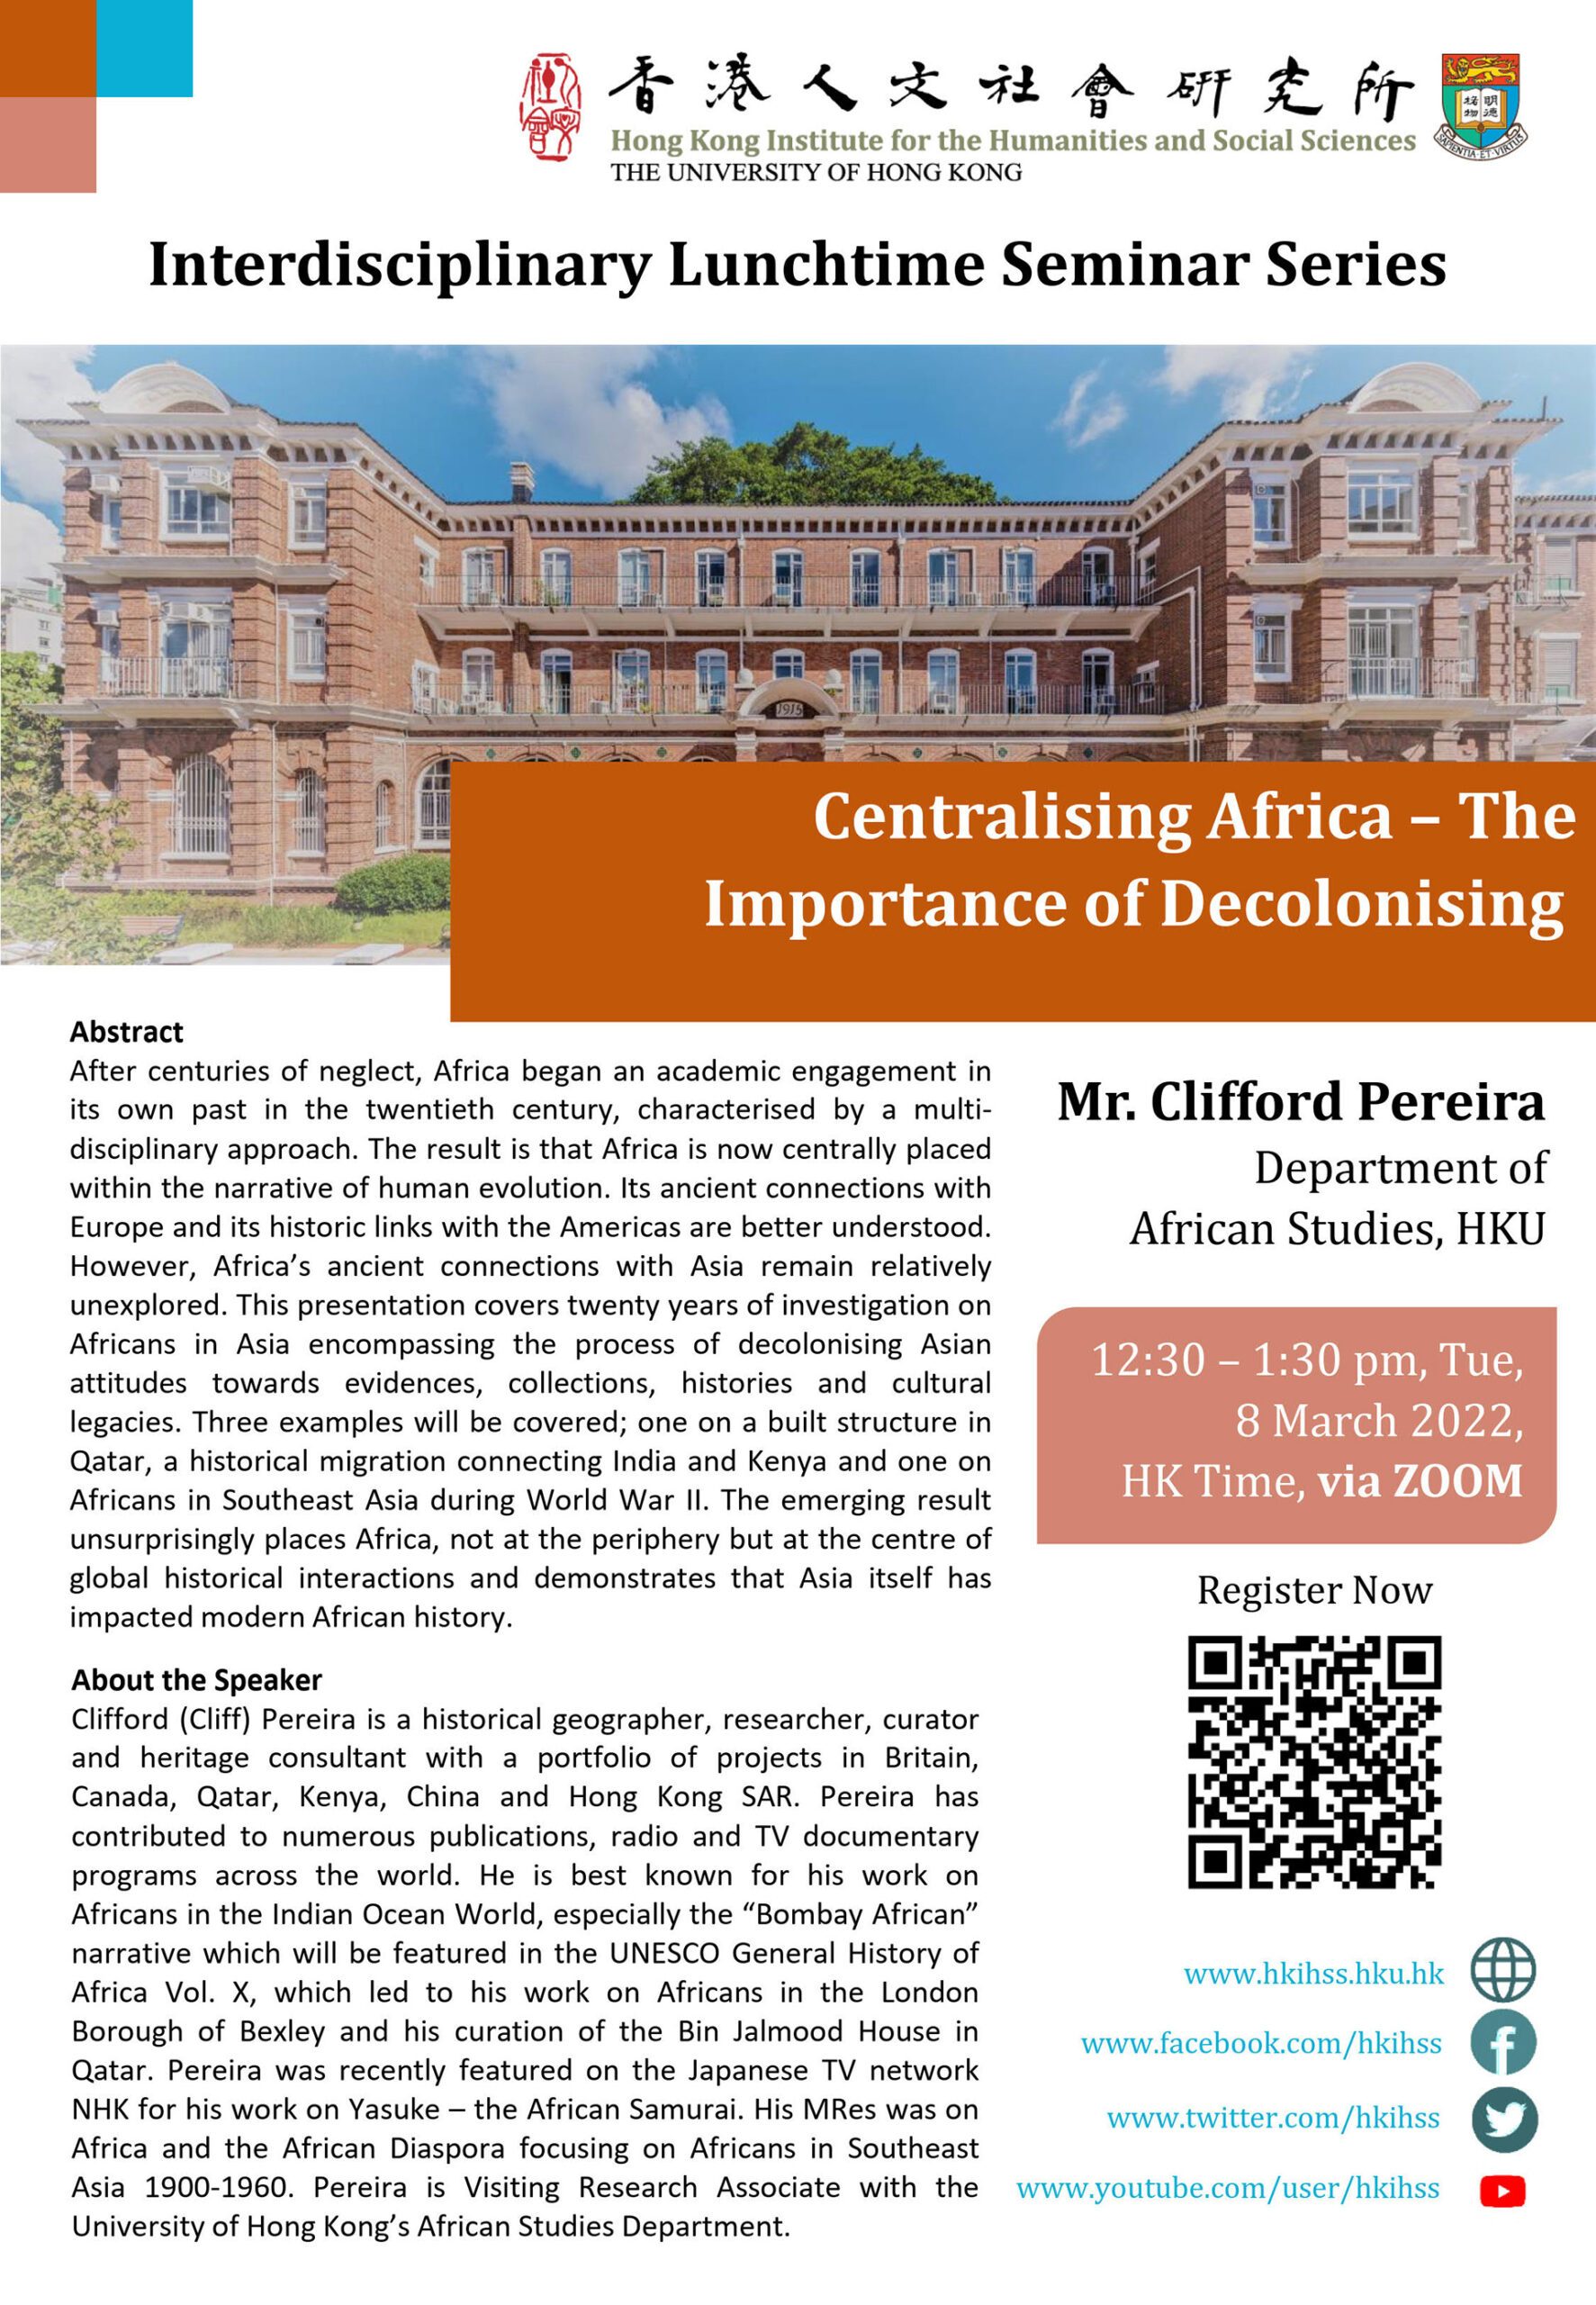 Interdisciplinary Lunchtime Seminar on “Centralising Africa – The Importance of Decolonising” by Mr. Clifford Pereira (March 8, 2022)